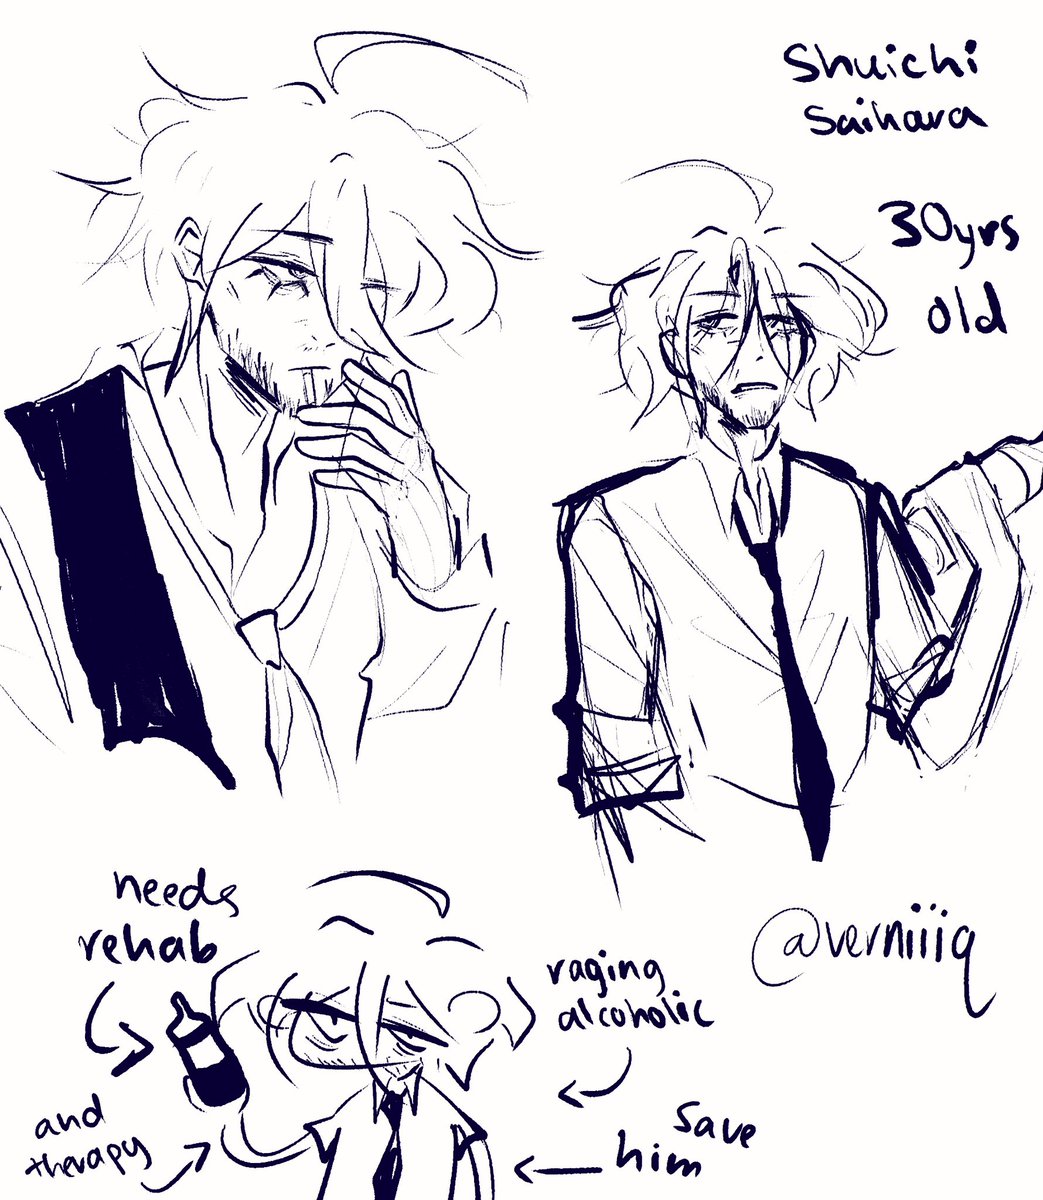 Heard Shuichi was now a “canon” smoker and ran with it

#shuichisaihara